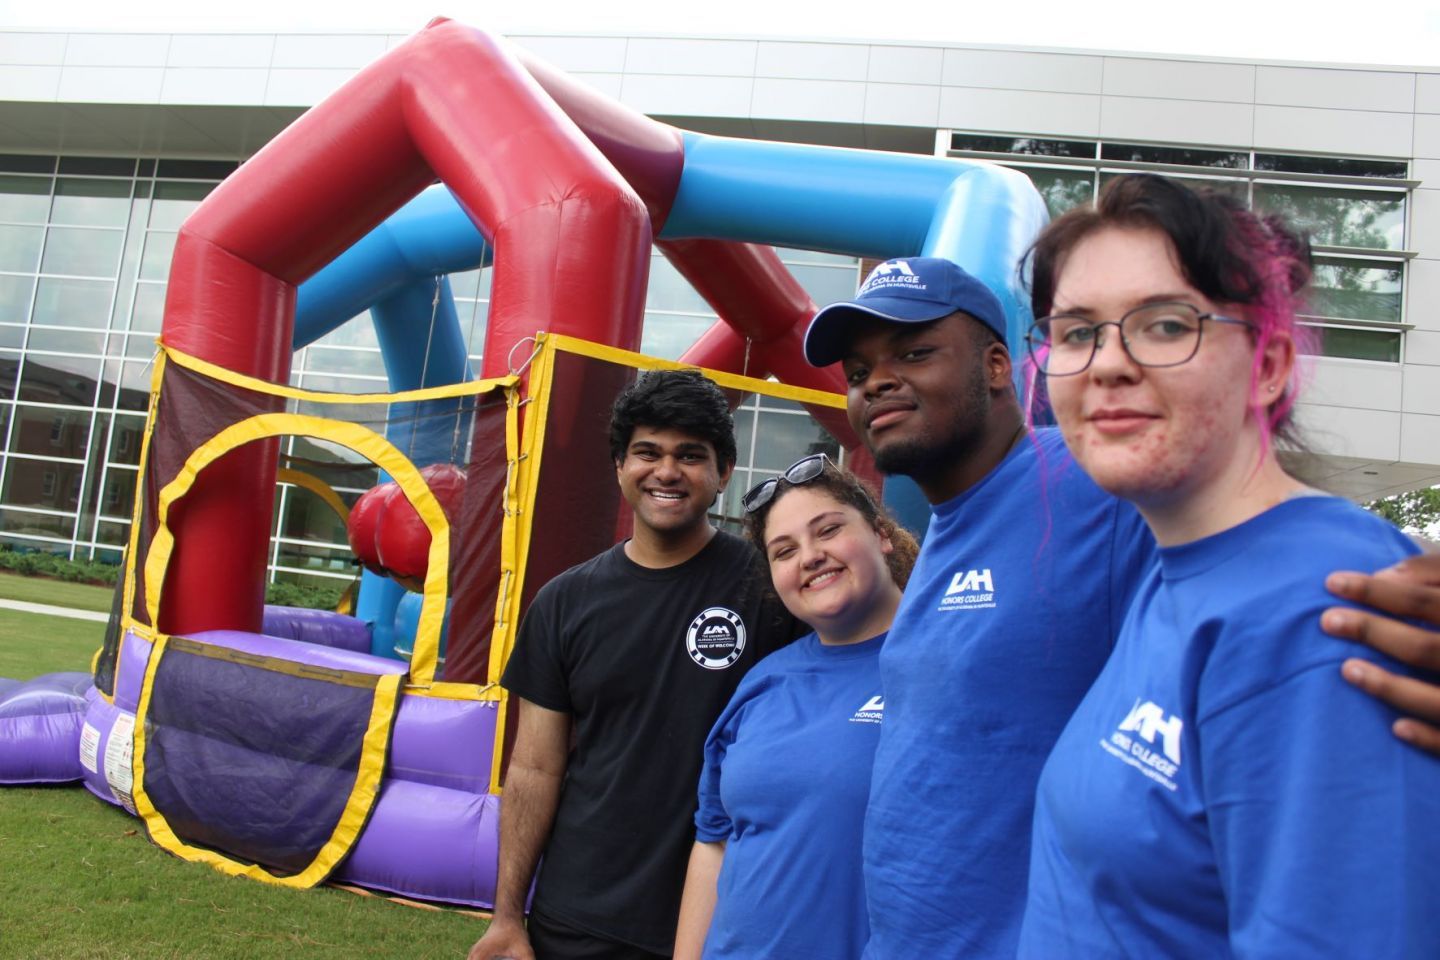 Honors College mentors posing in front of an inflatable bounce house